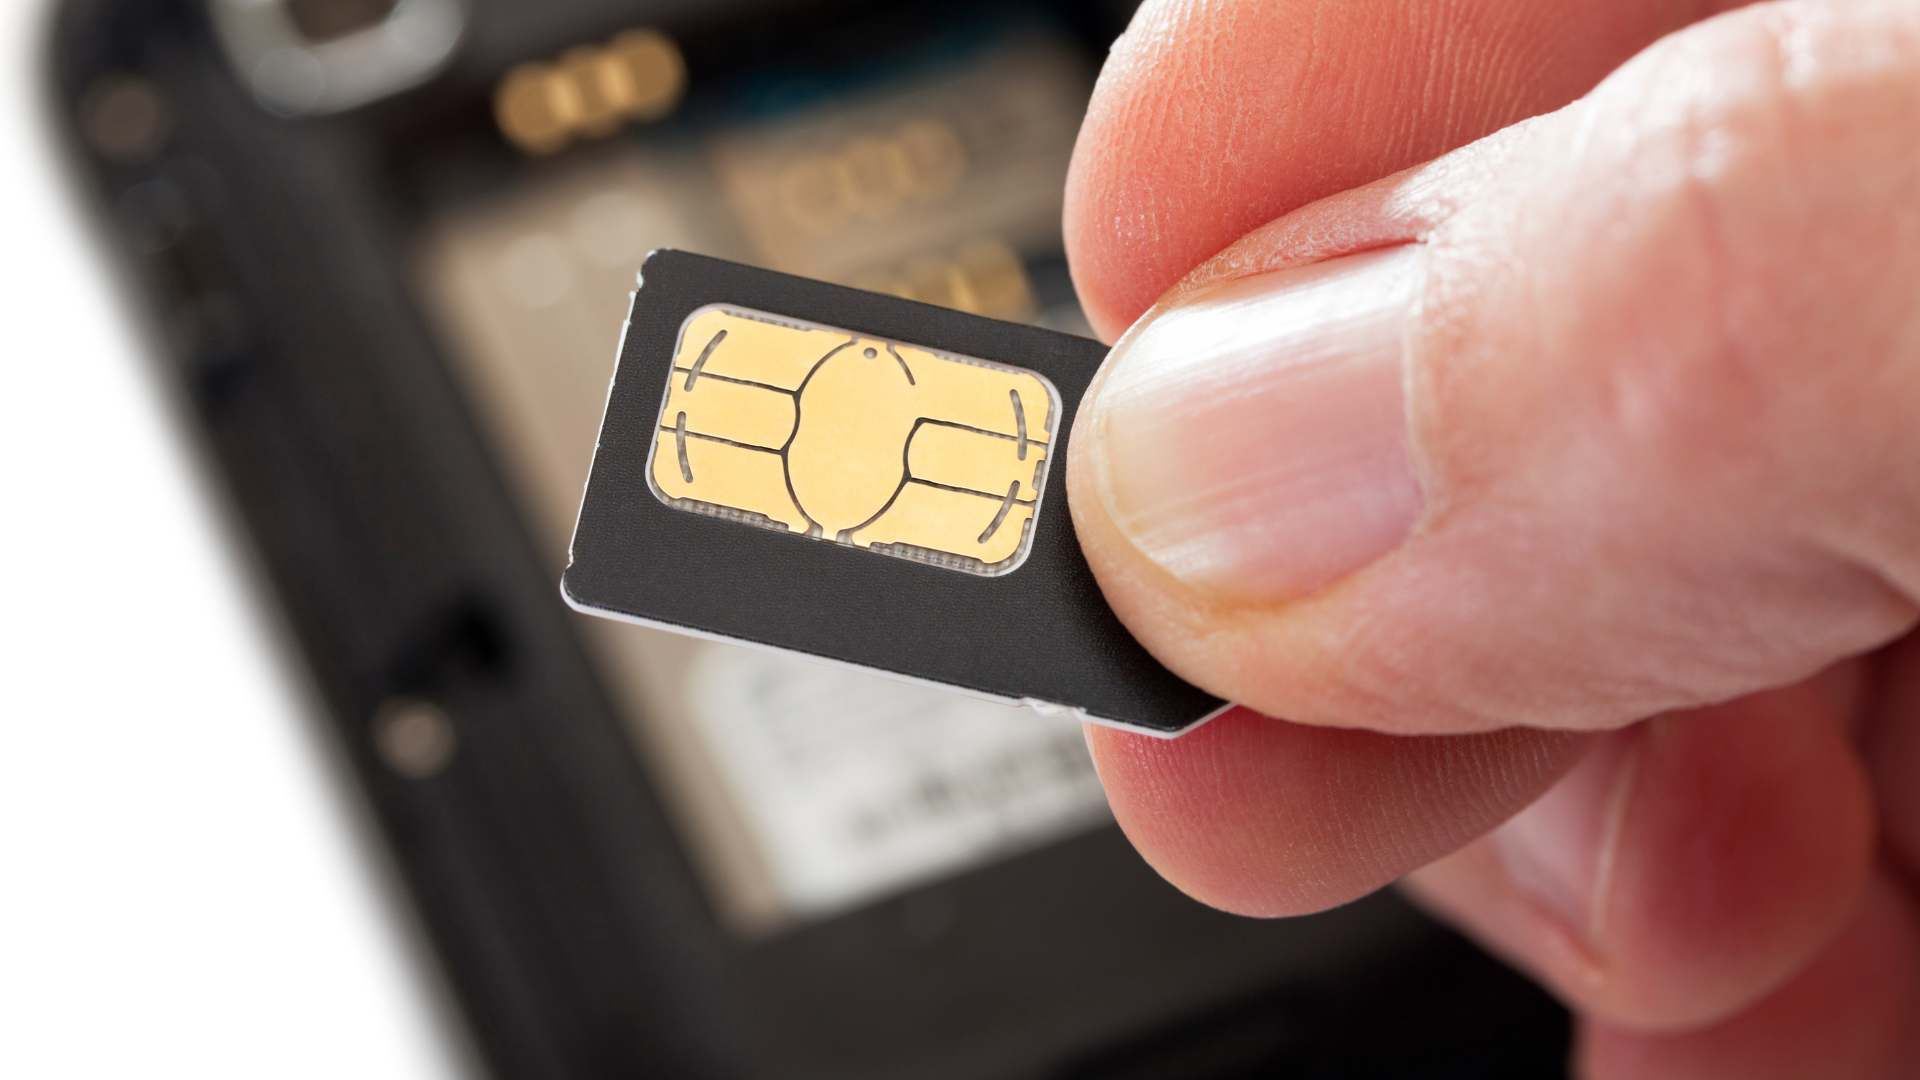 A loaded SIM card suitable for everyone